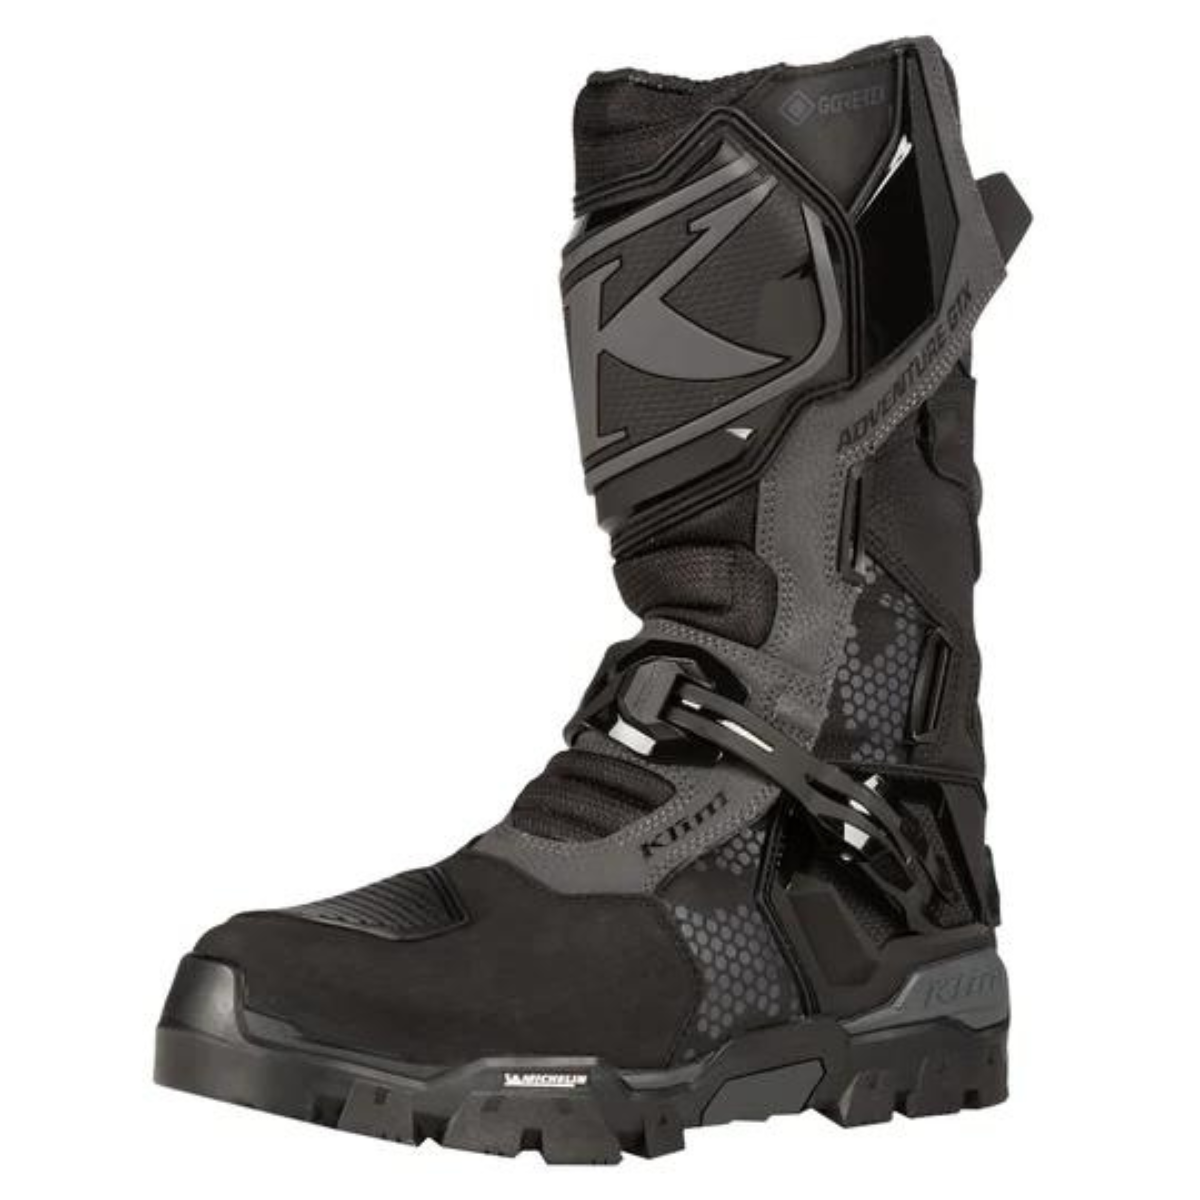 Klim Adventure GTX Stealth Black Boot for motorcycle riding